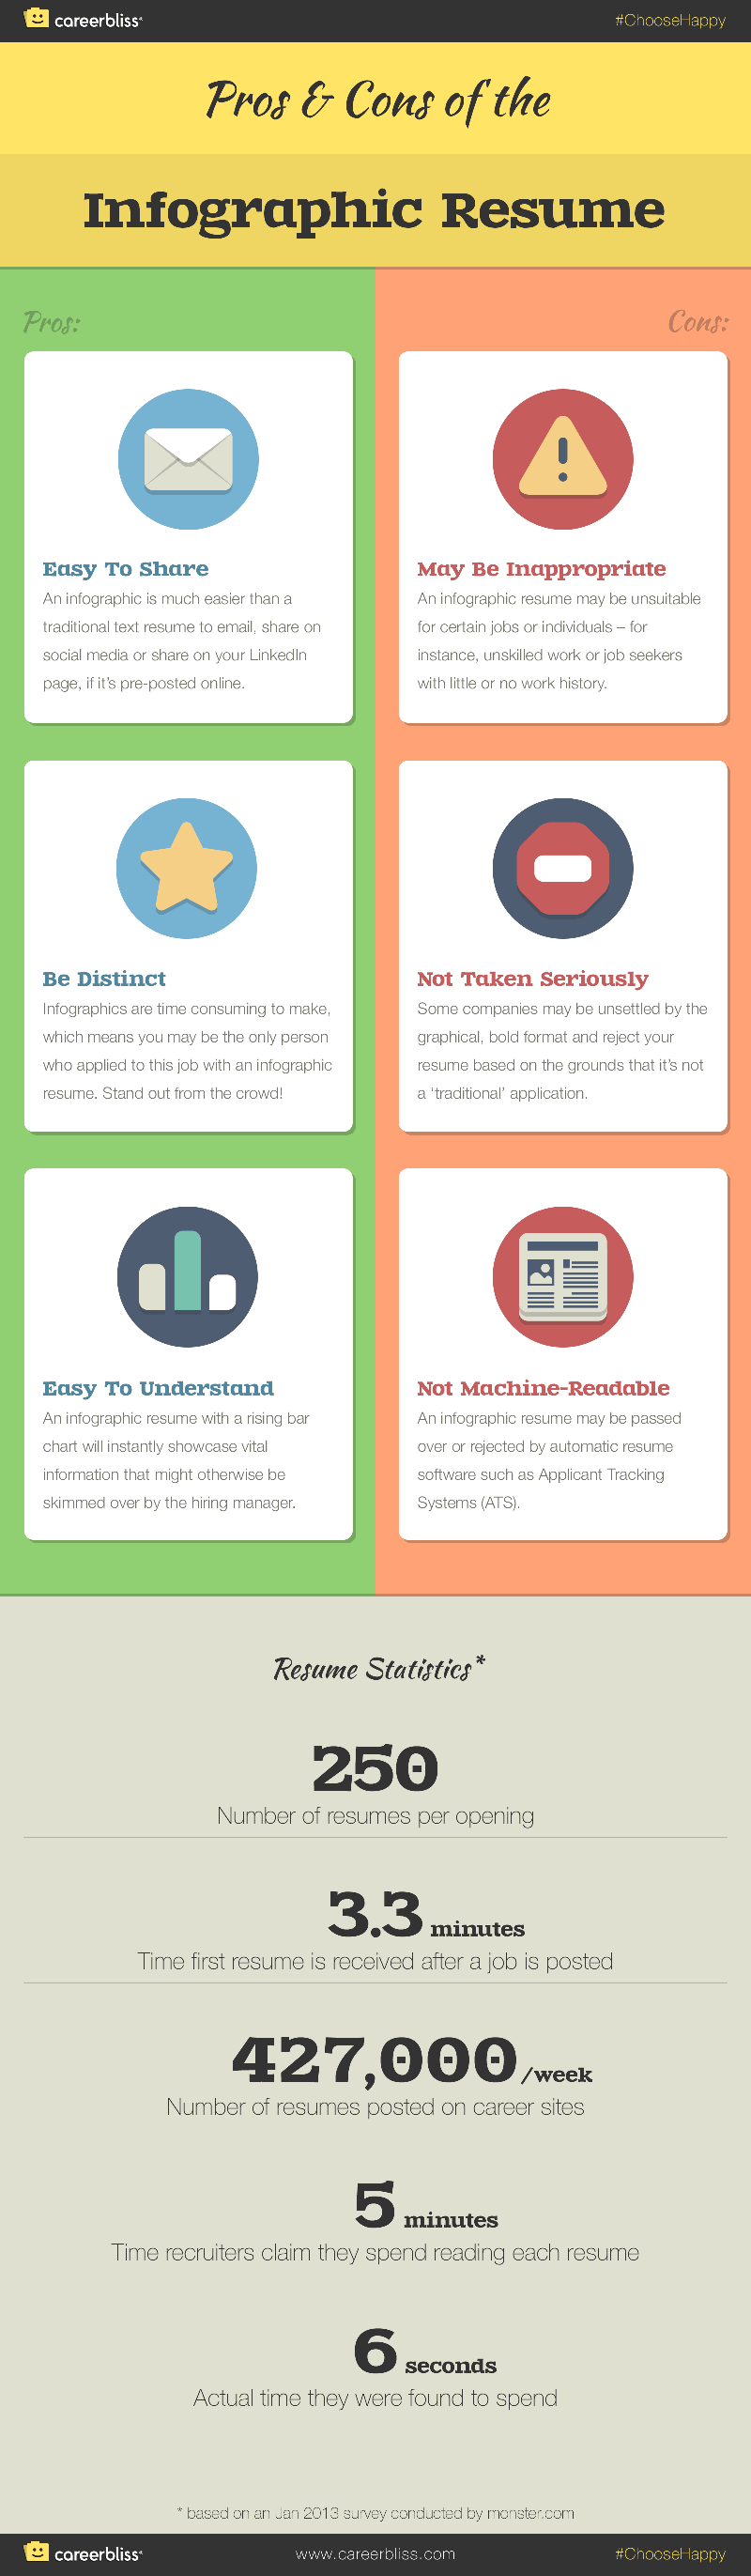 resume tip tuesday pros and cons of the infographic resume